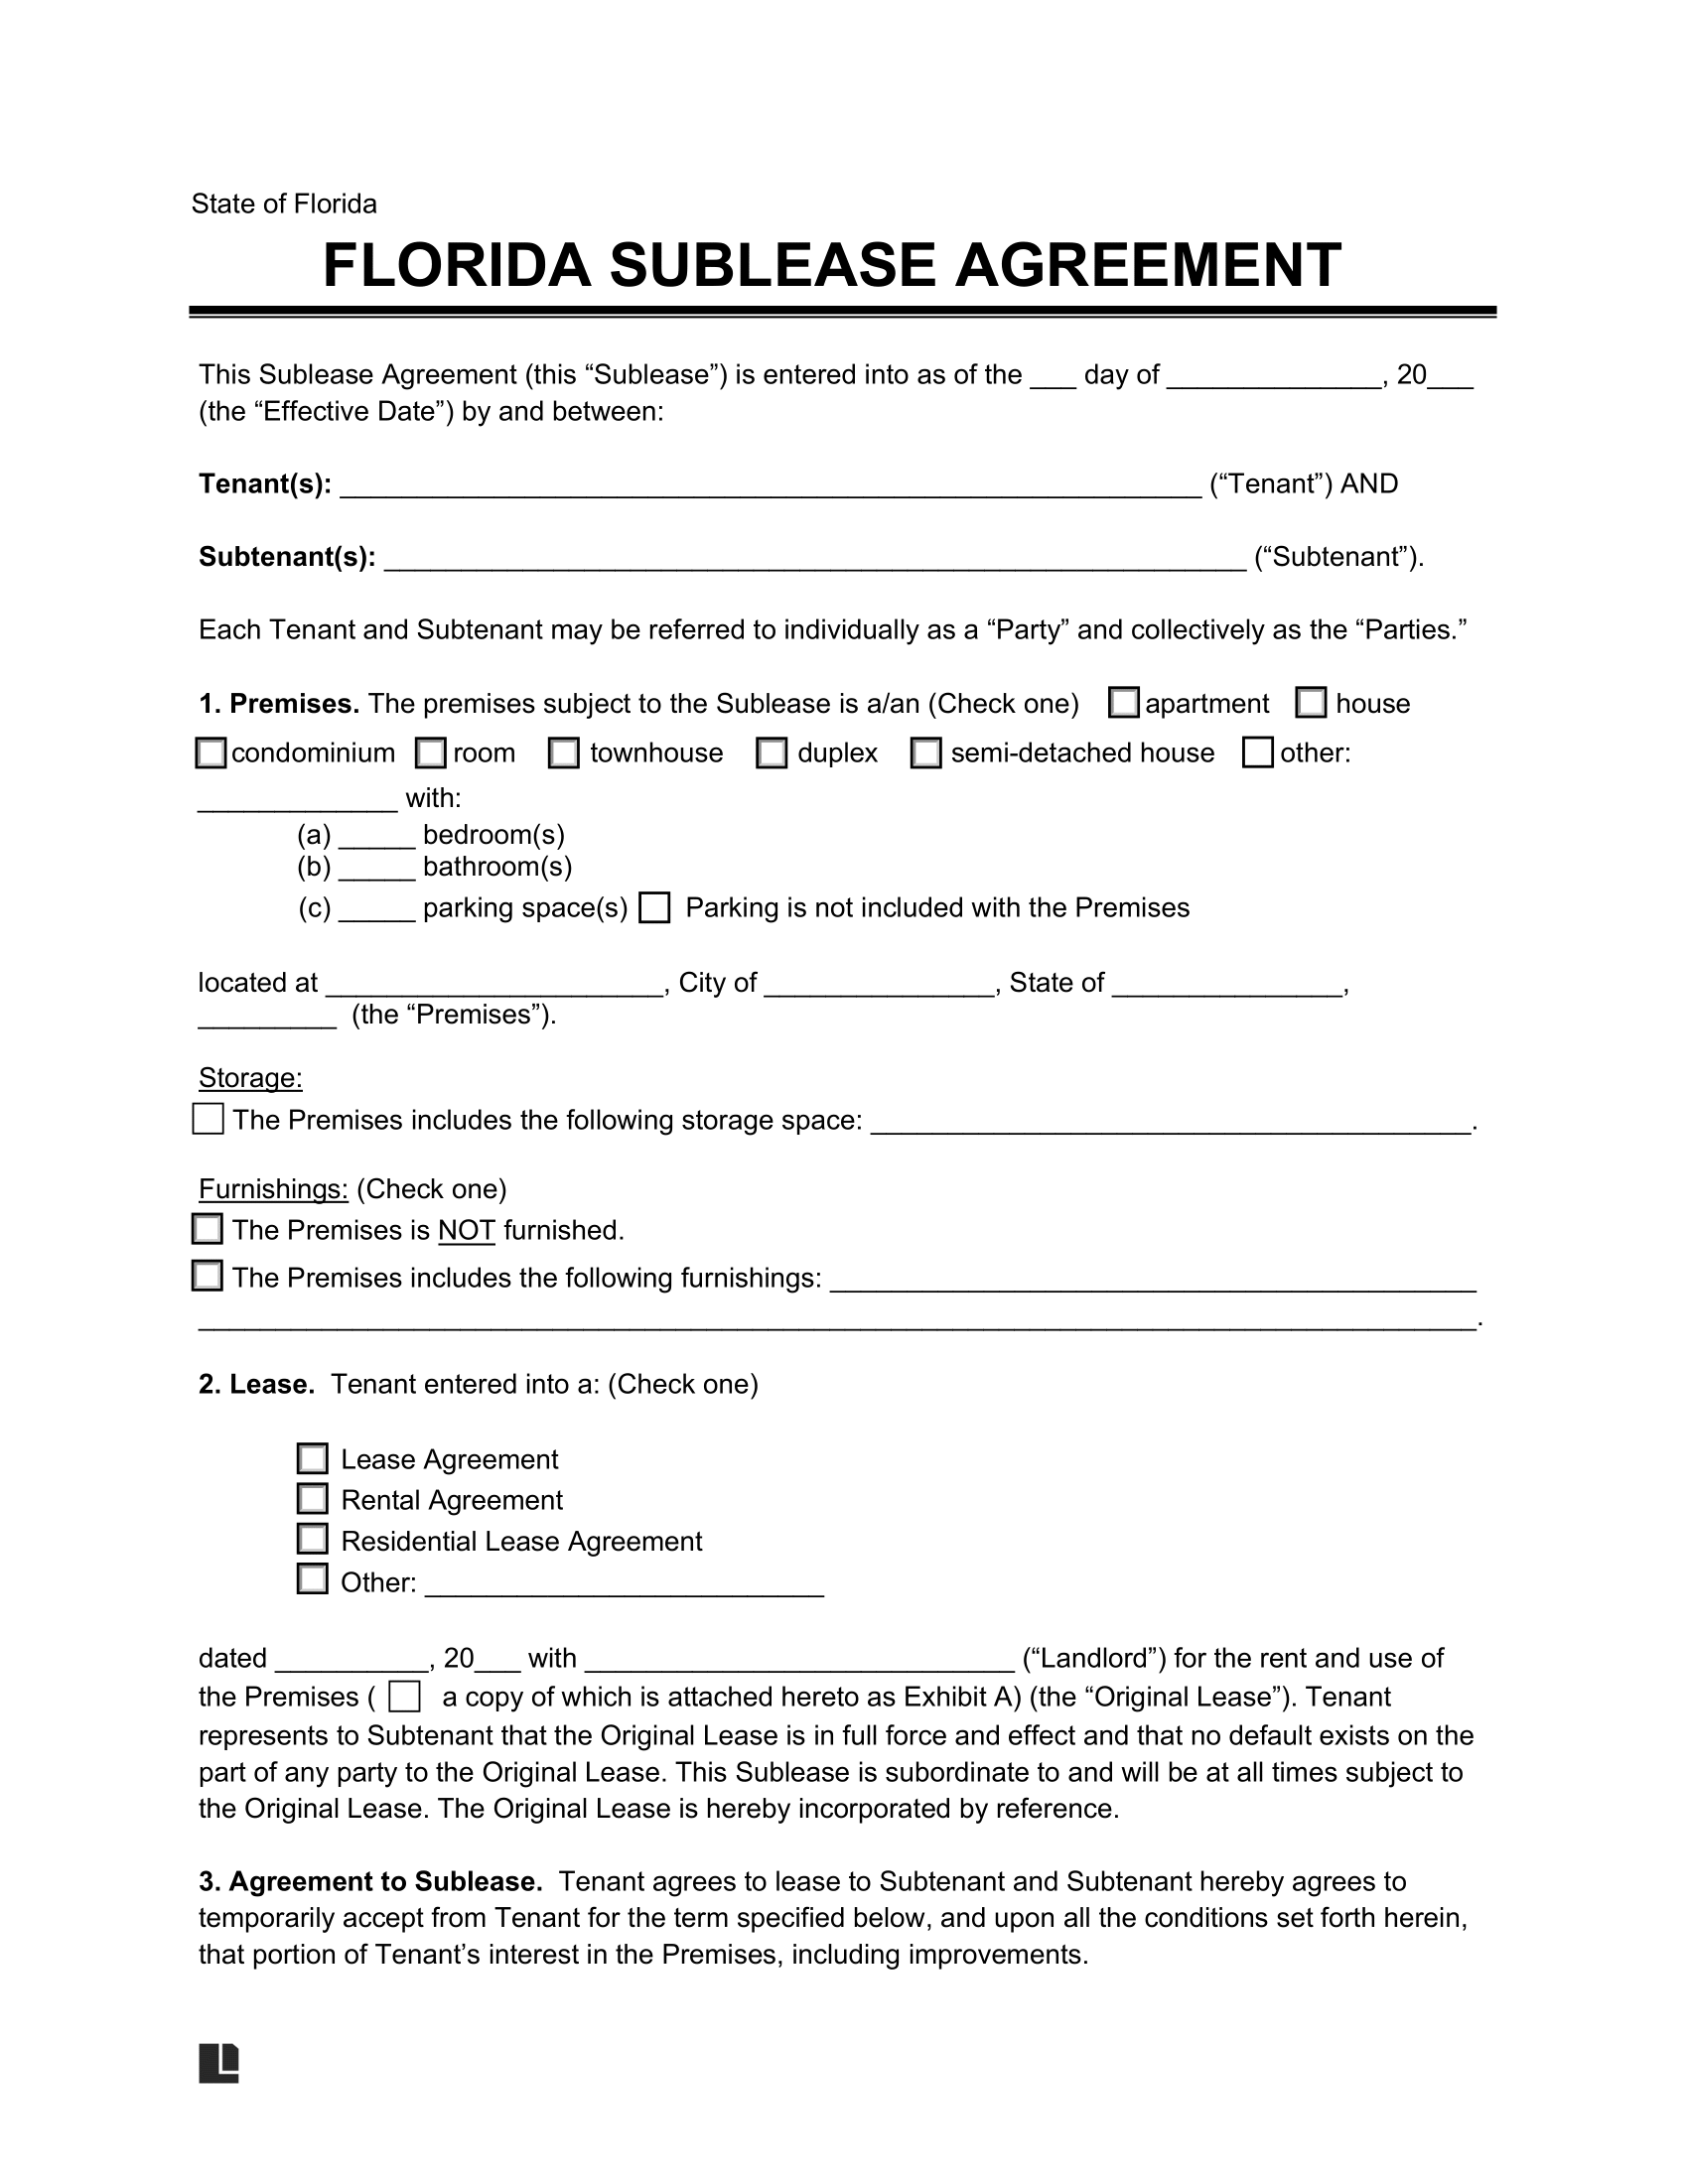 Florida Sublease Agreement Template